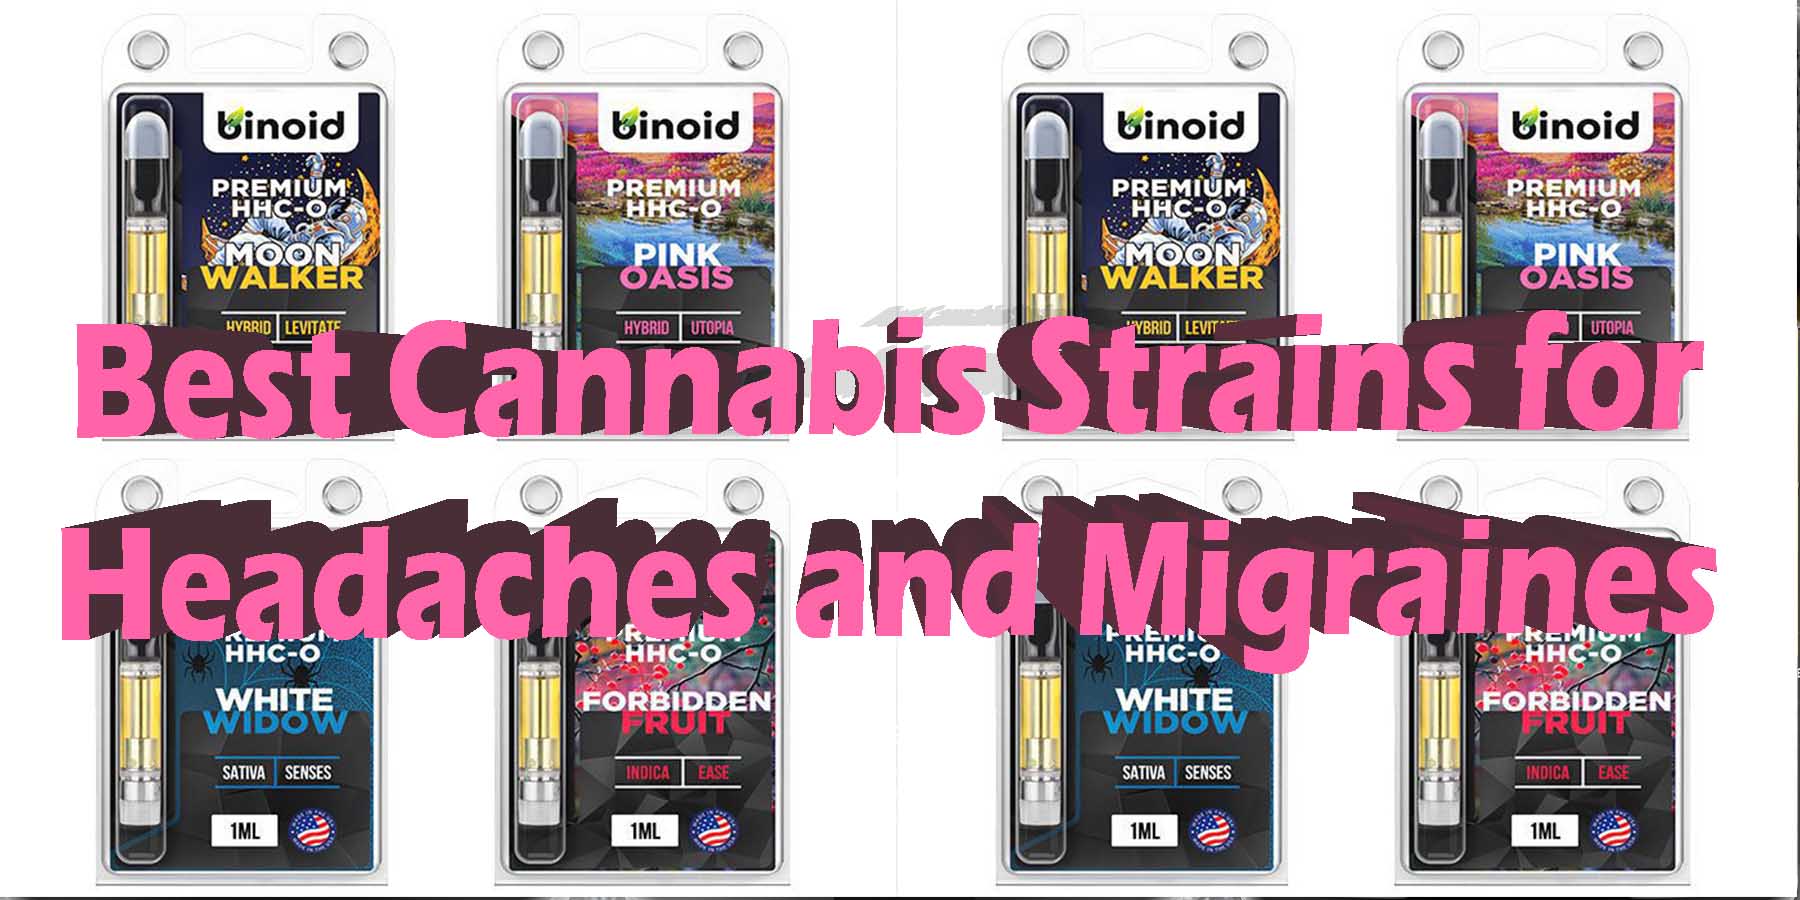 Best Cannabis Strains for Headaches and Migraines WhereToGet HowToGetNearMe BestPlace LowestPrice Coupon Discount For Smoking Best High Smoke Shop Online Near Me Strongest Binoid